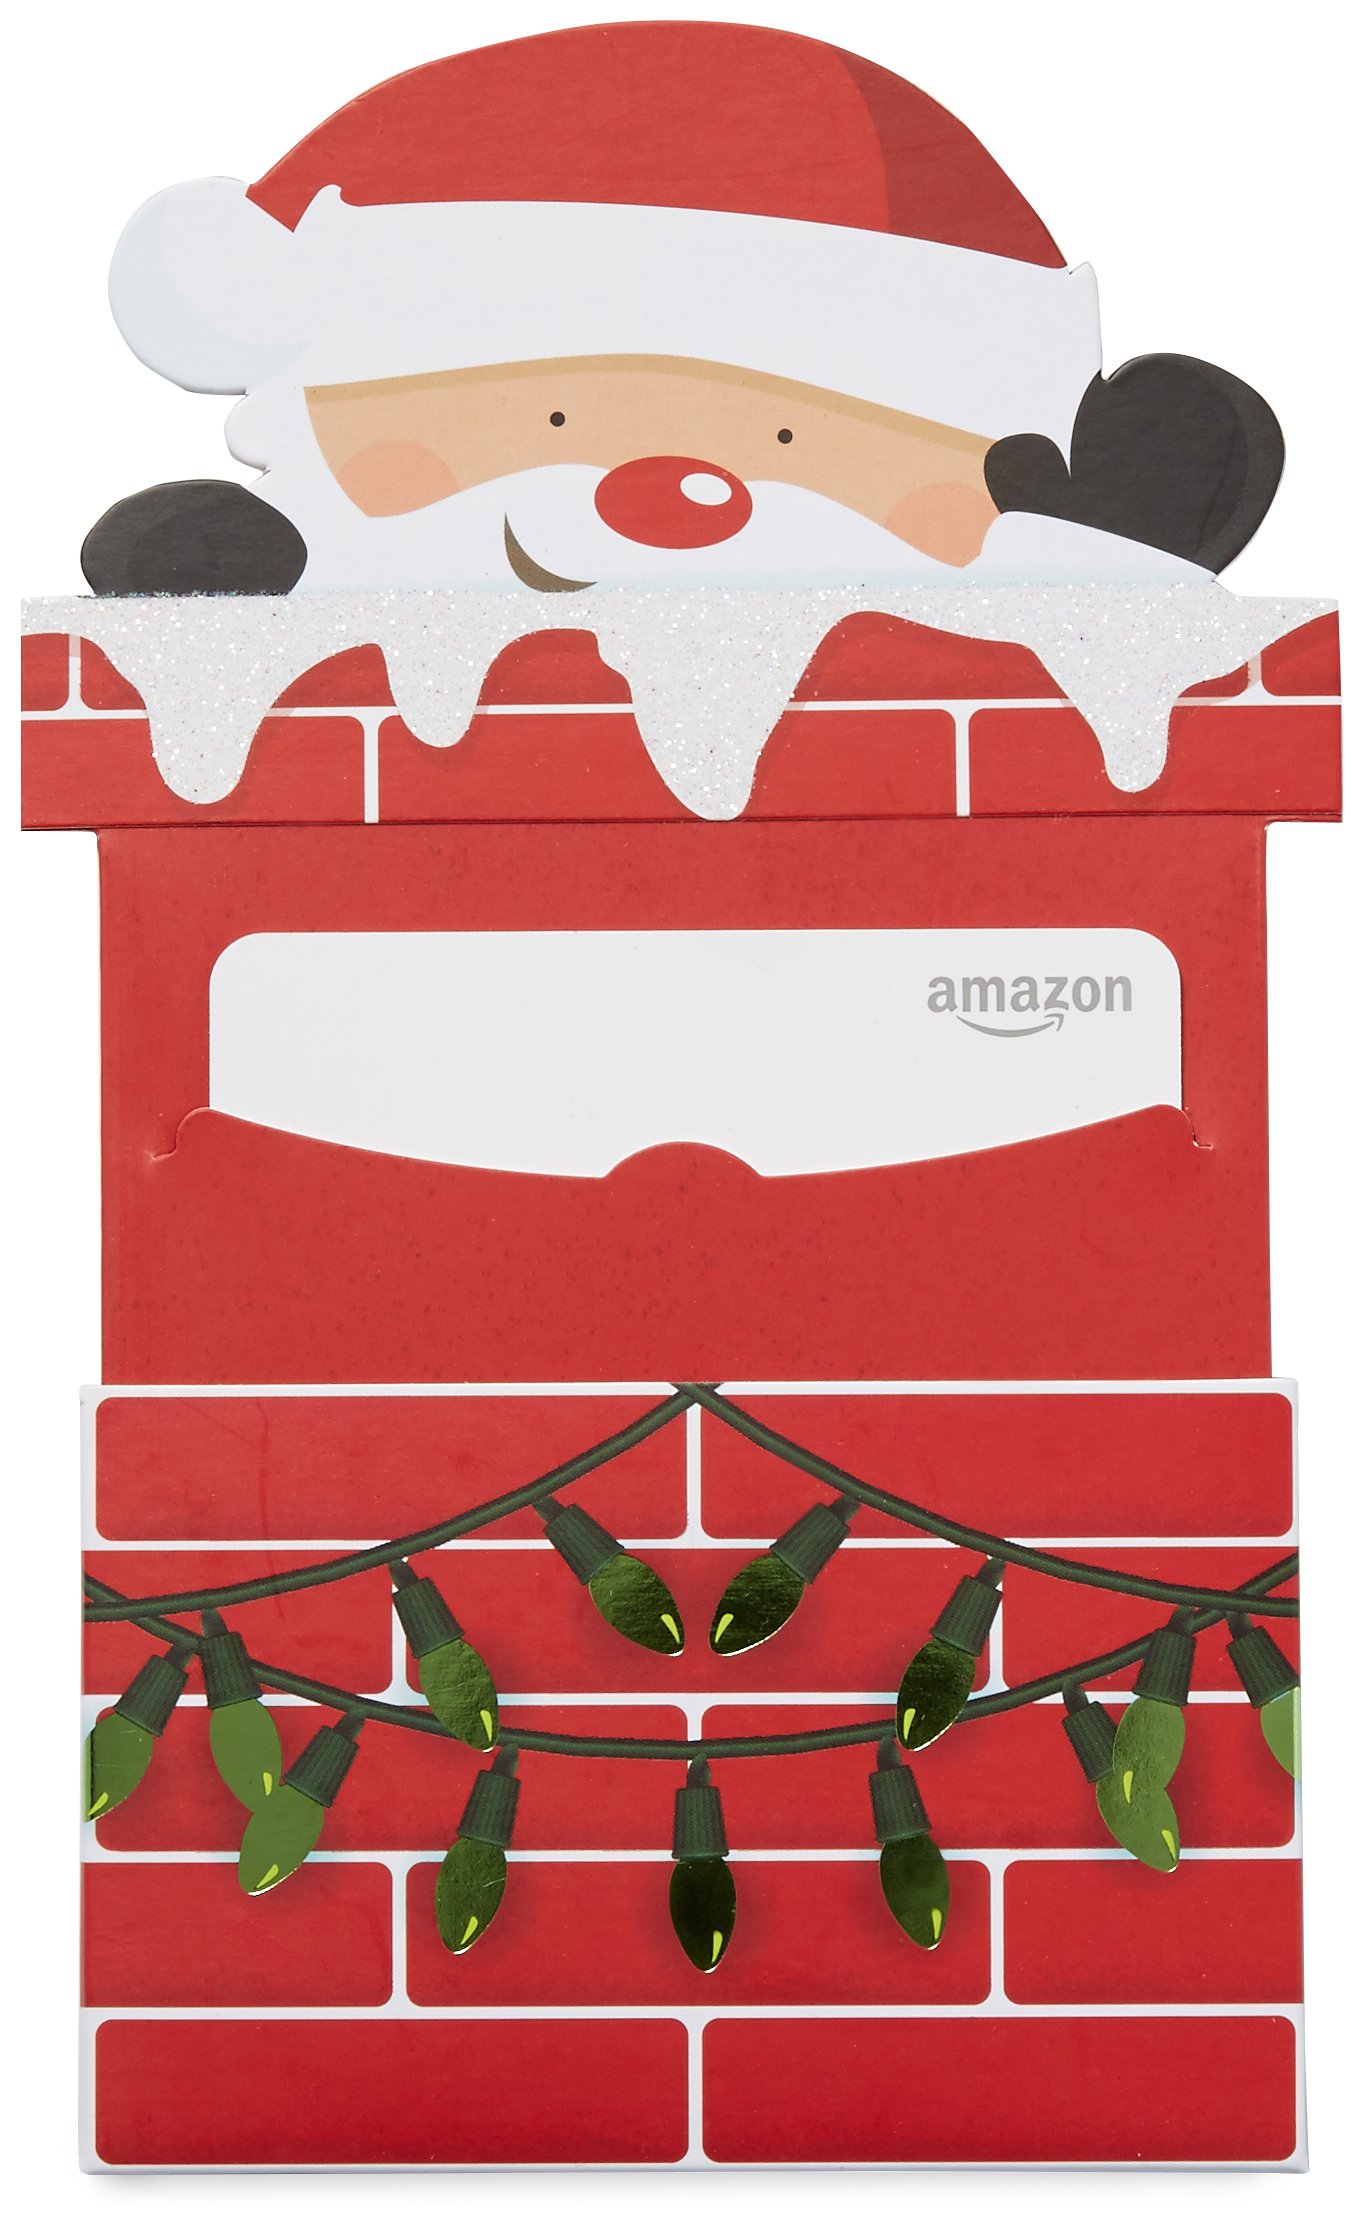 Book Cover Amazon.com Gift Card in a Reveal (Various Designs) 0 Santa Chimney Reveal